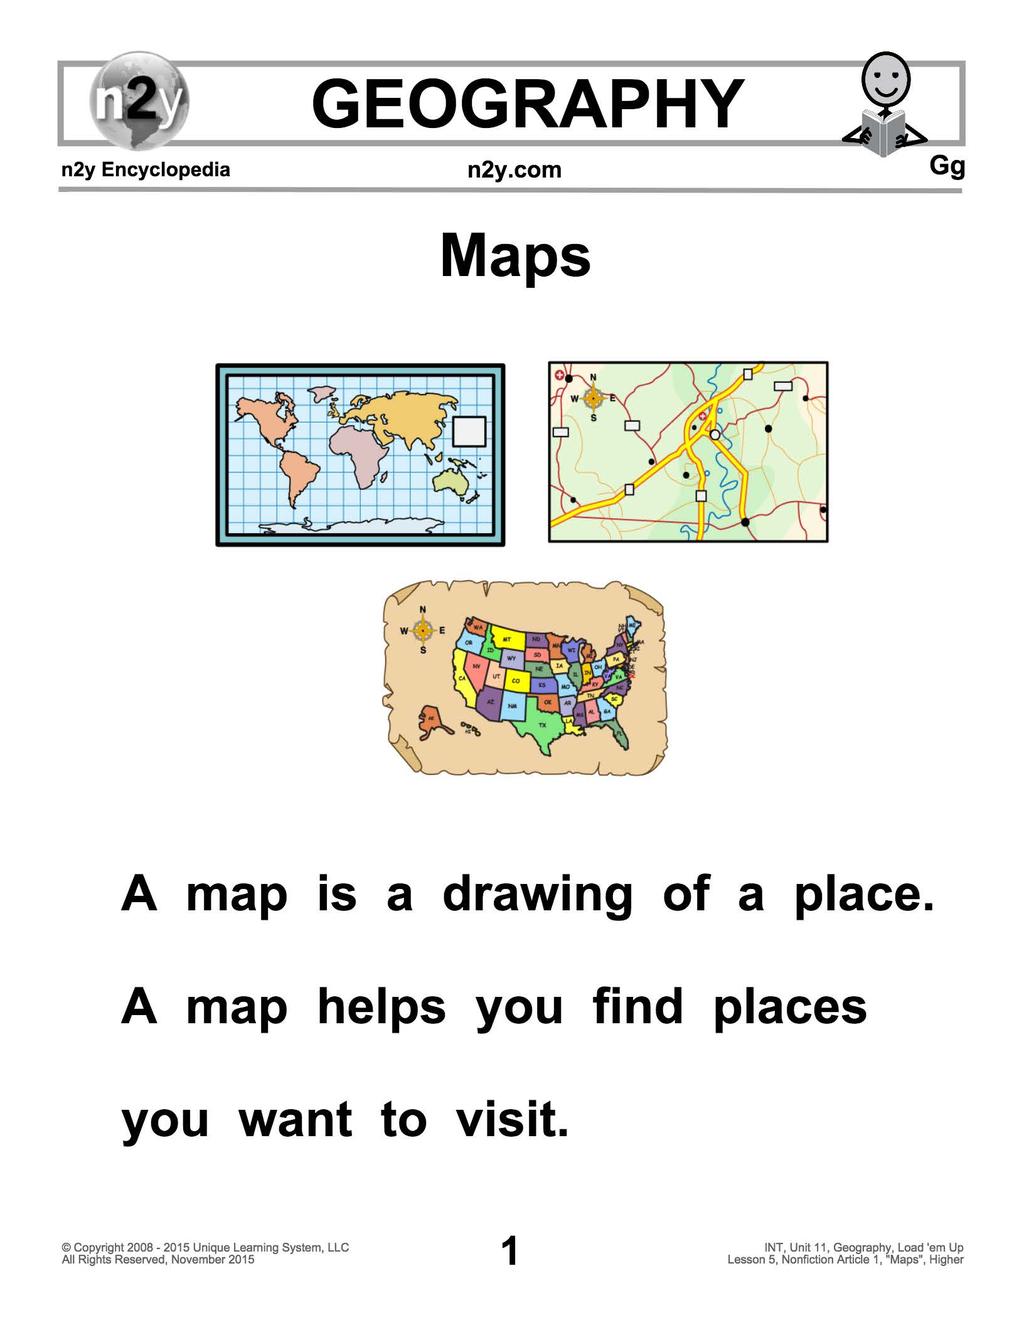 Maps A map is a drawing of a place. A map helps you find places you want to visit.